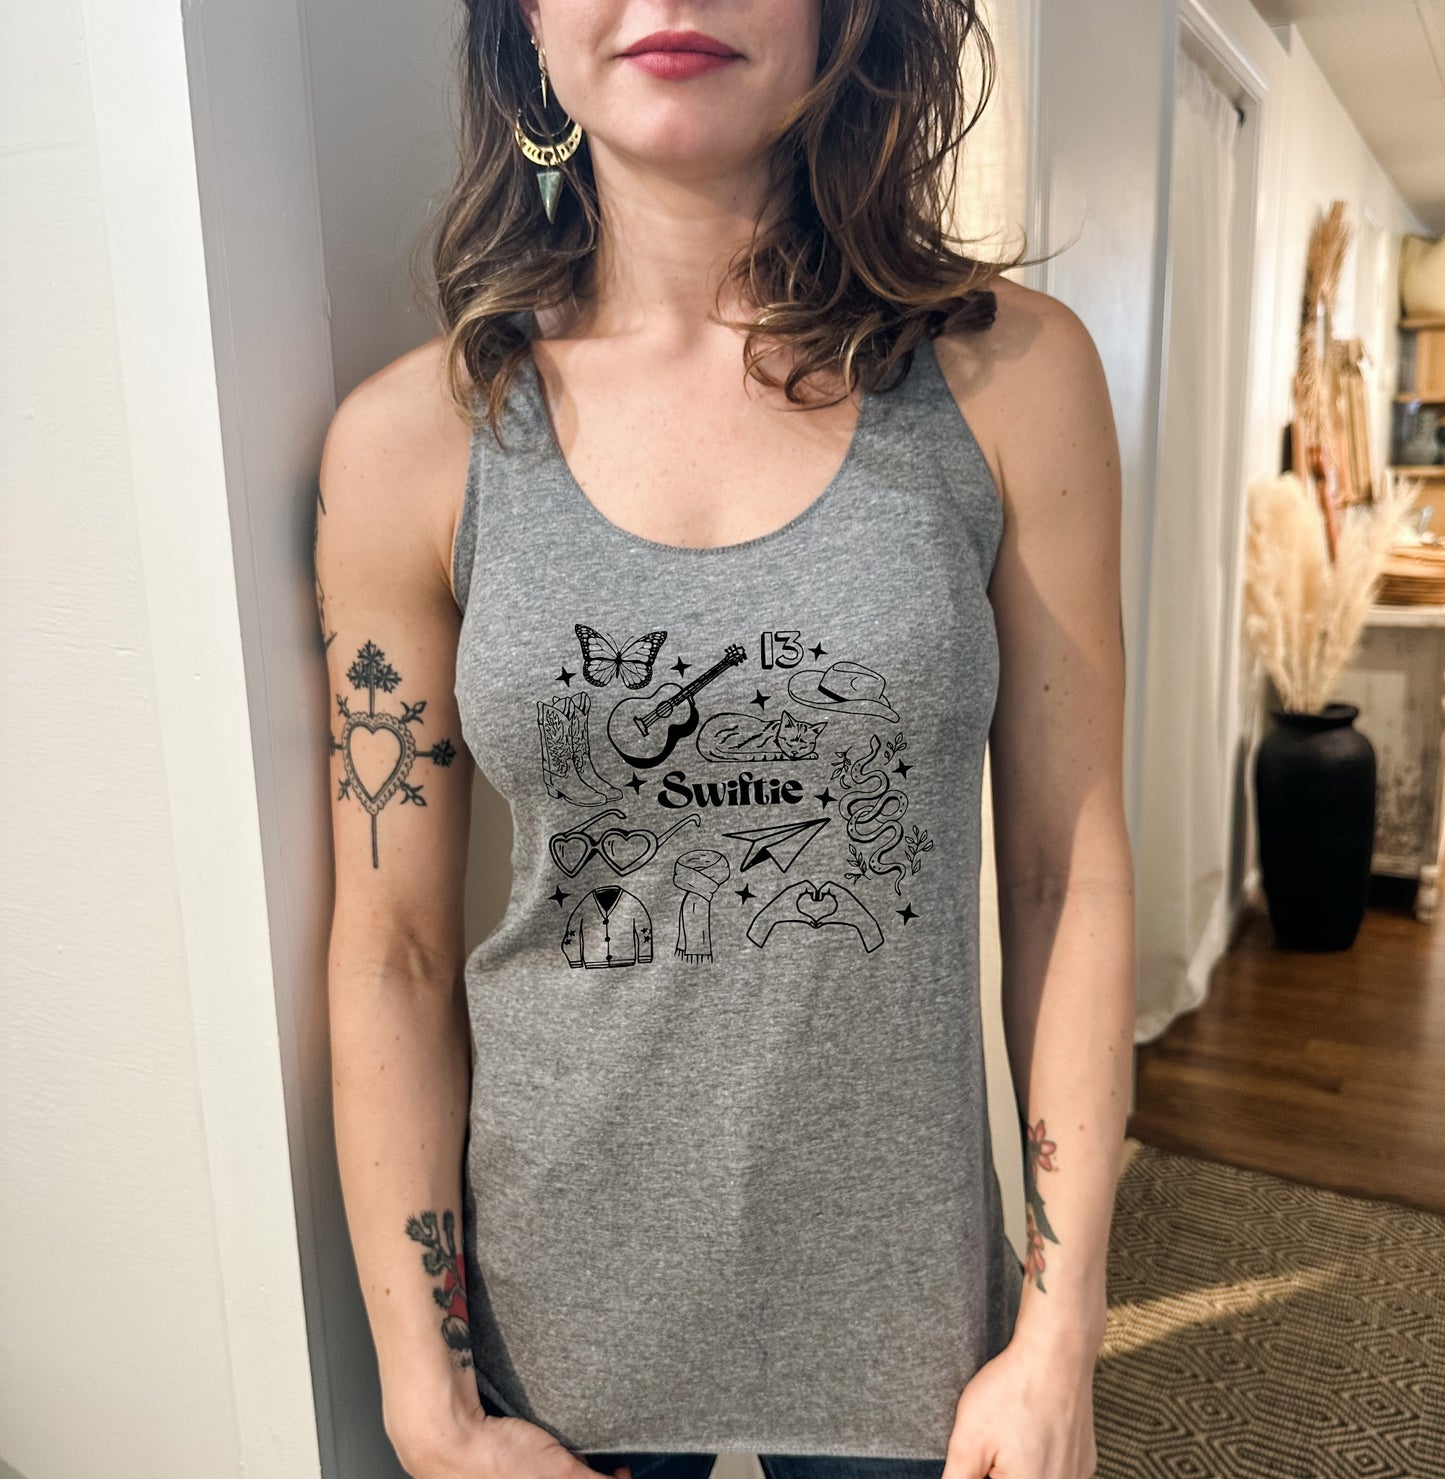 a woman wearing a tank top with a tattoo on her arm